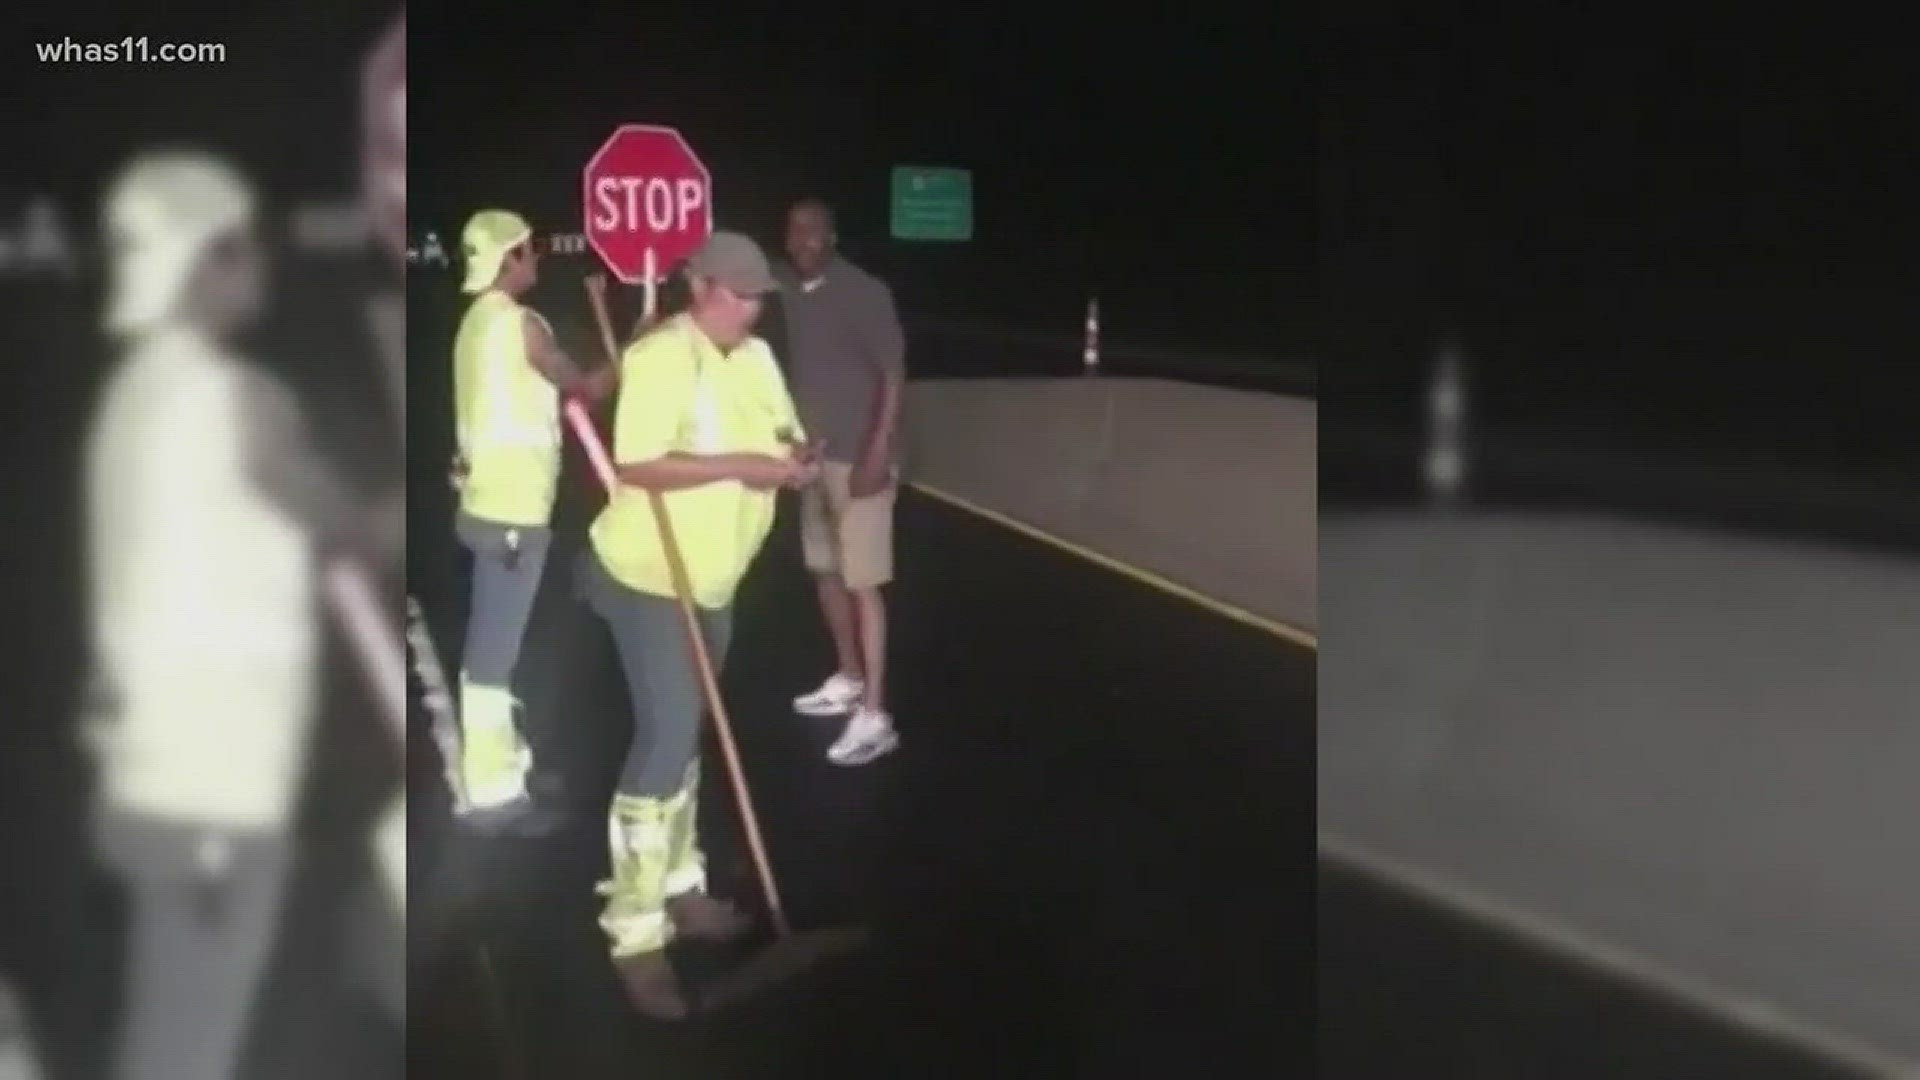 In the viral video, the trooper ends up being pinned to the ground by a construction crew